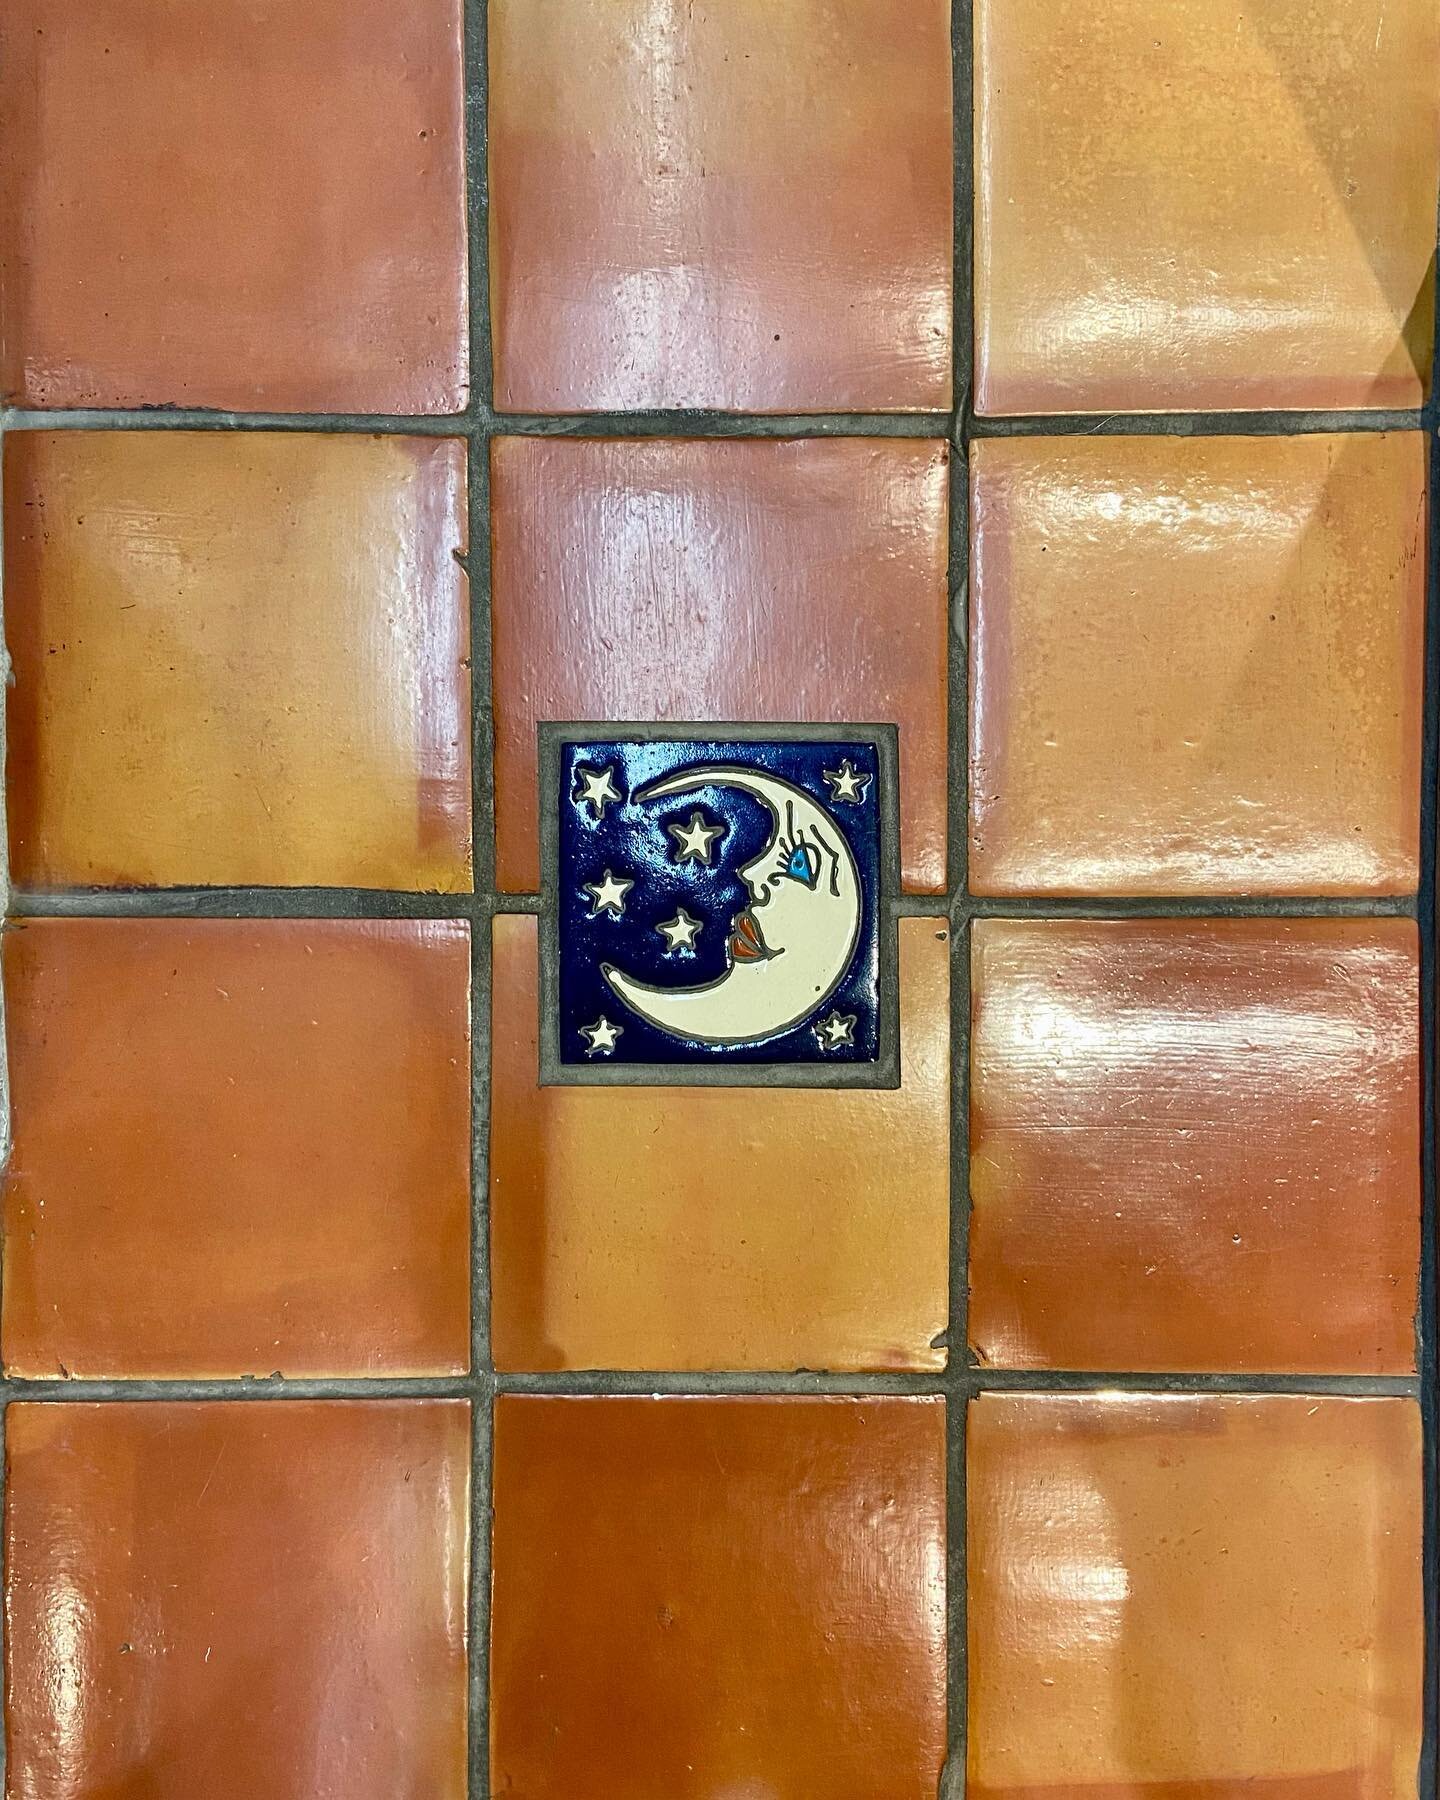 Mexican handmade Saltillo tile! Come in today to take a look at Mosaicos Jalisco!
1513 N Pulaski Rd
Chicago, IL 60651
773-276-8388

#tile #tiles #mosaic #porcelaintiles #walltiles #walltile #backsplash #chicago #humboldtpark #logansquare #familyowned